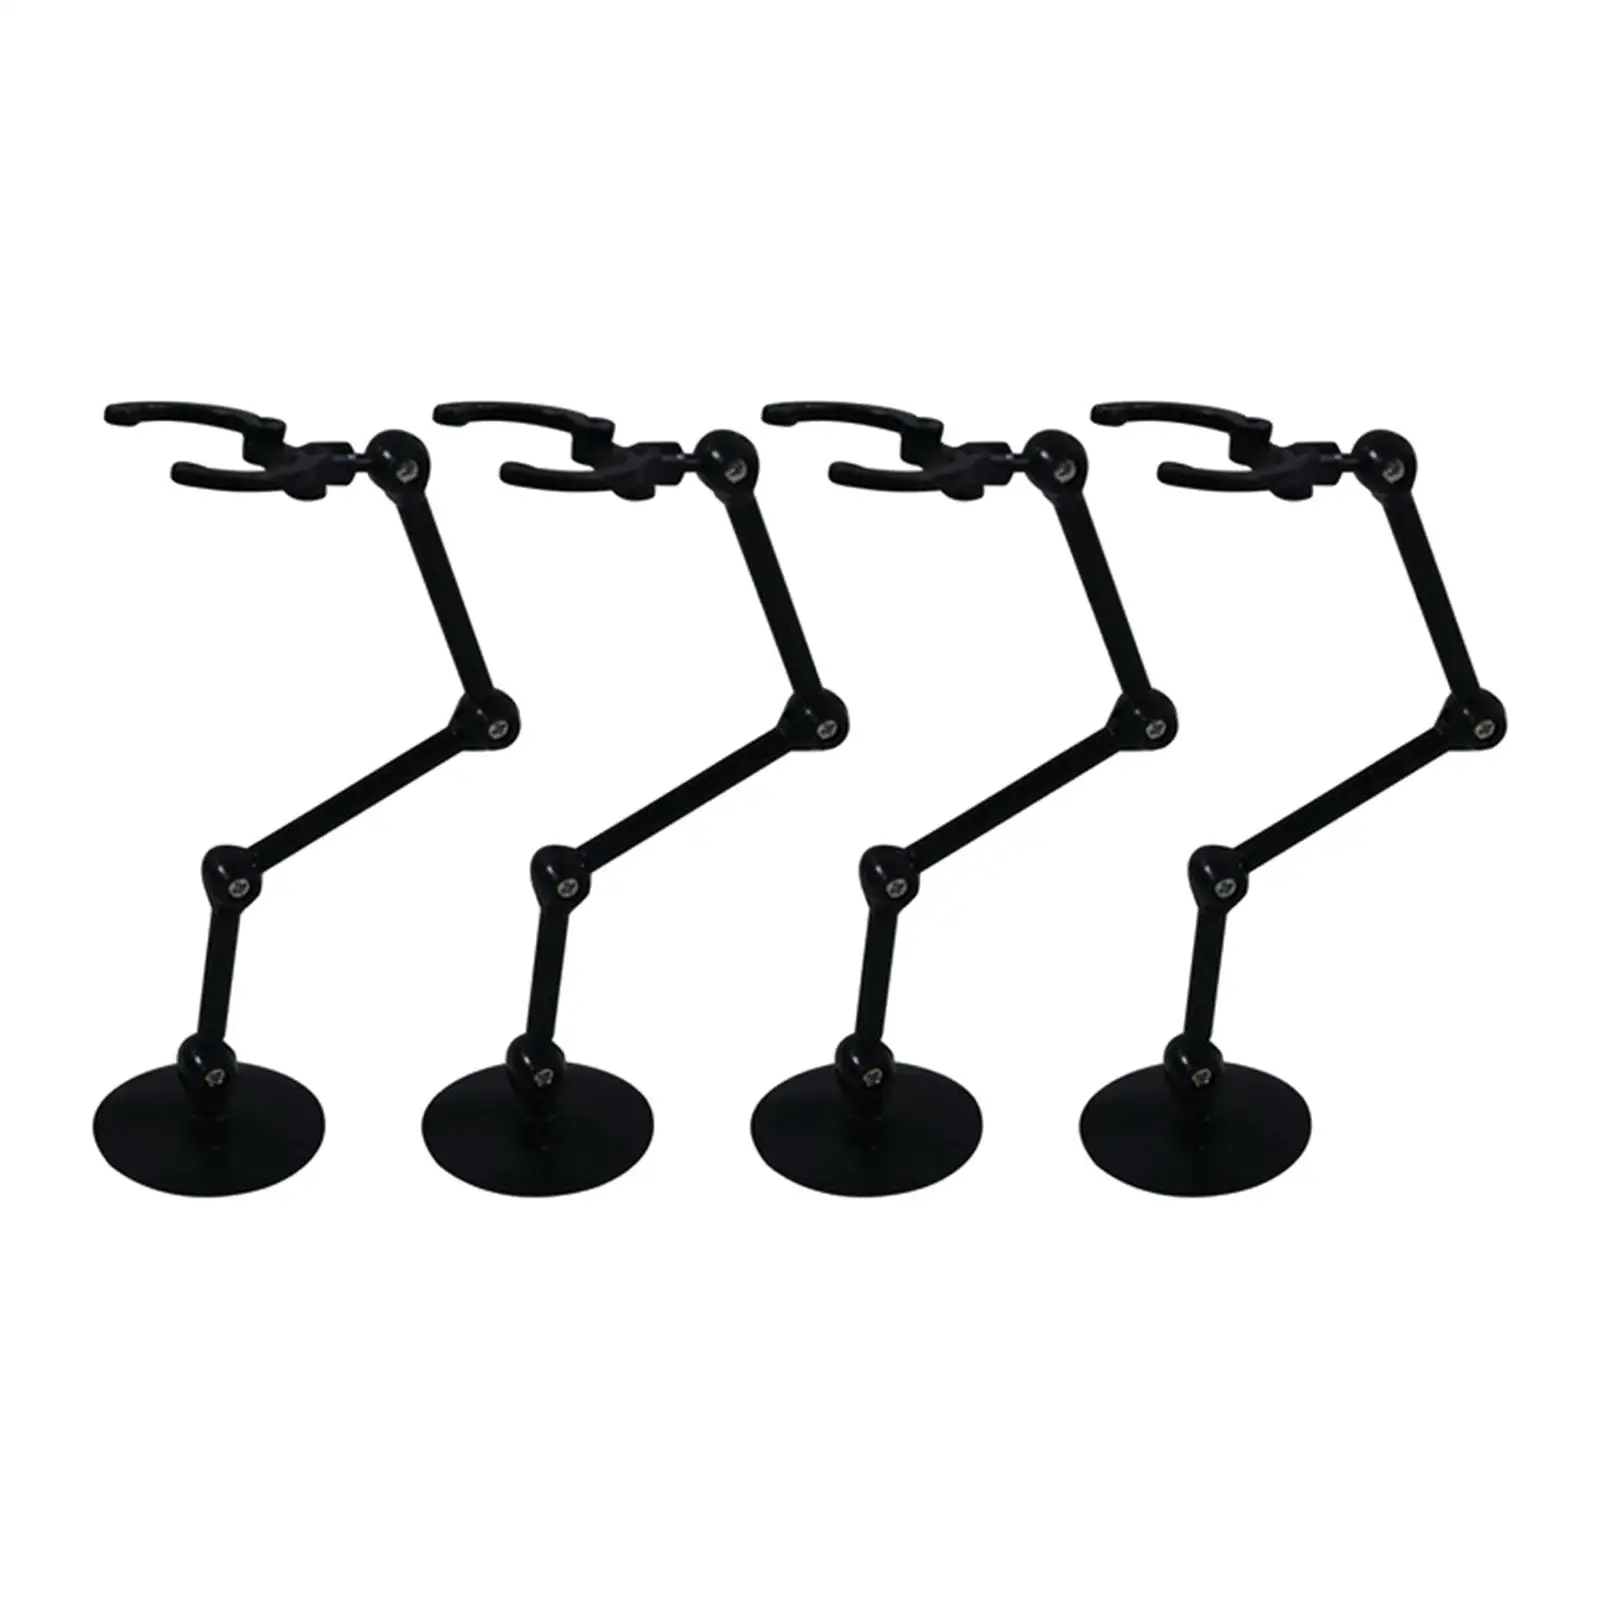 4x Base Display Stand Doll Model Bracket for 6``